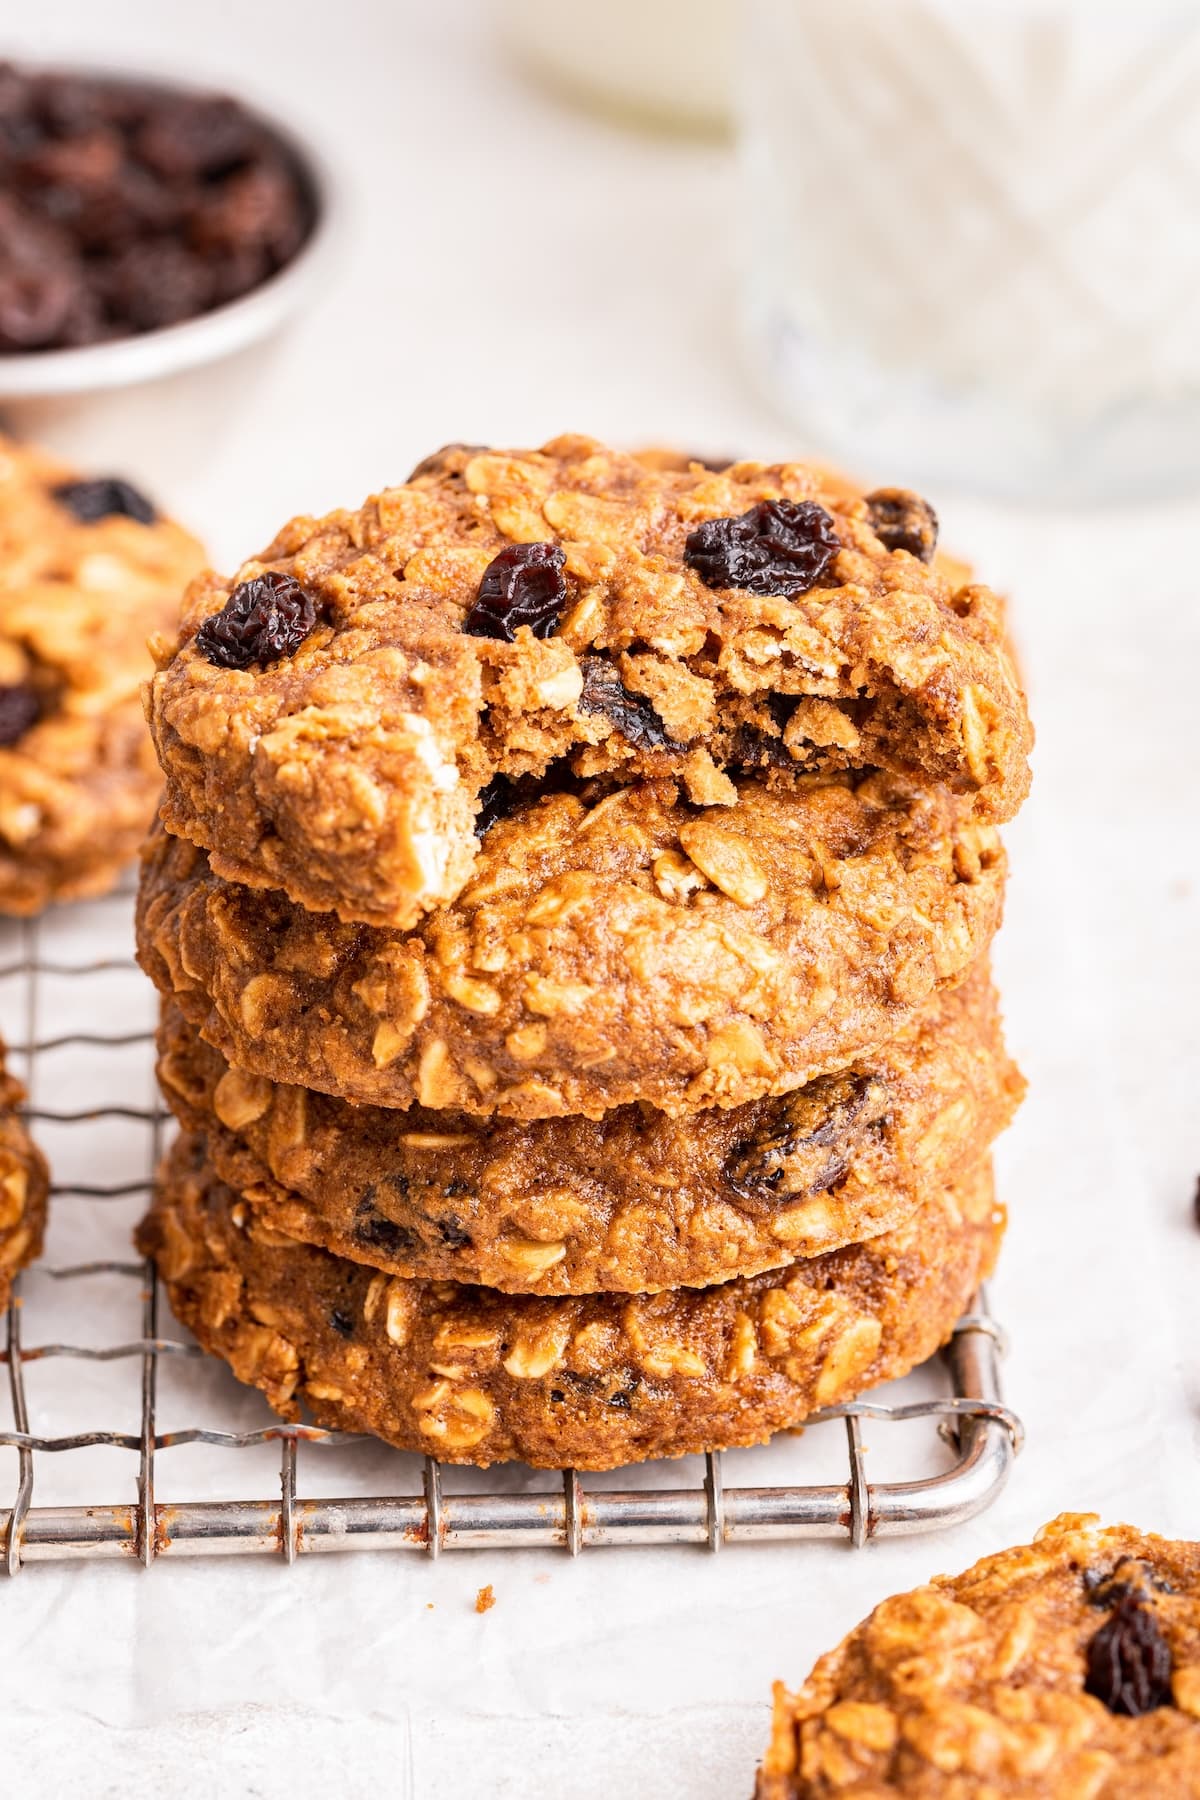 Oatmeal raisin cookies stacked on one another with the top cookie having a bite taken from it.